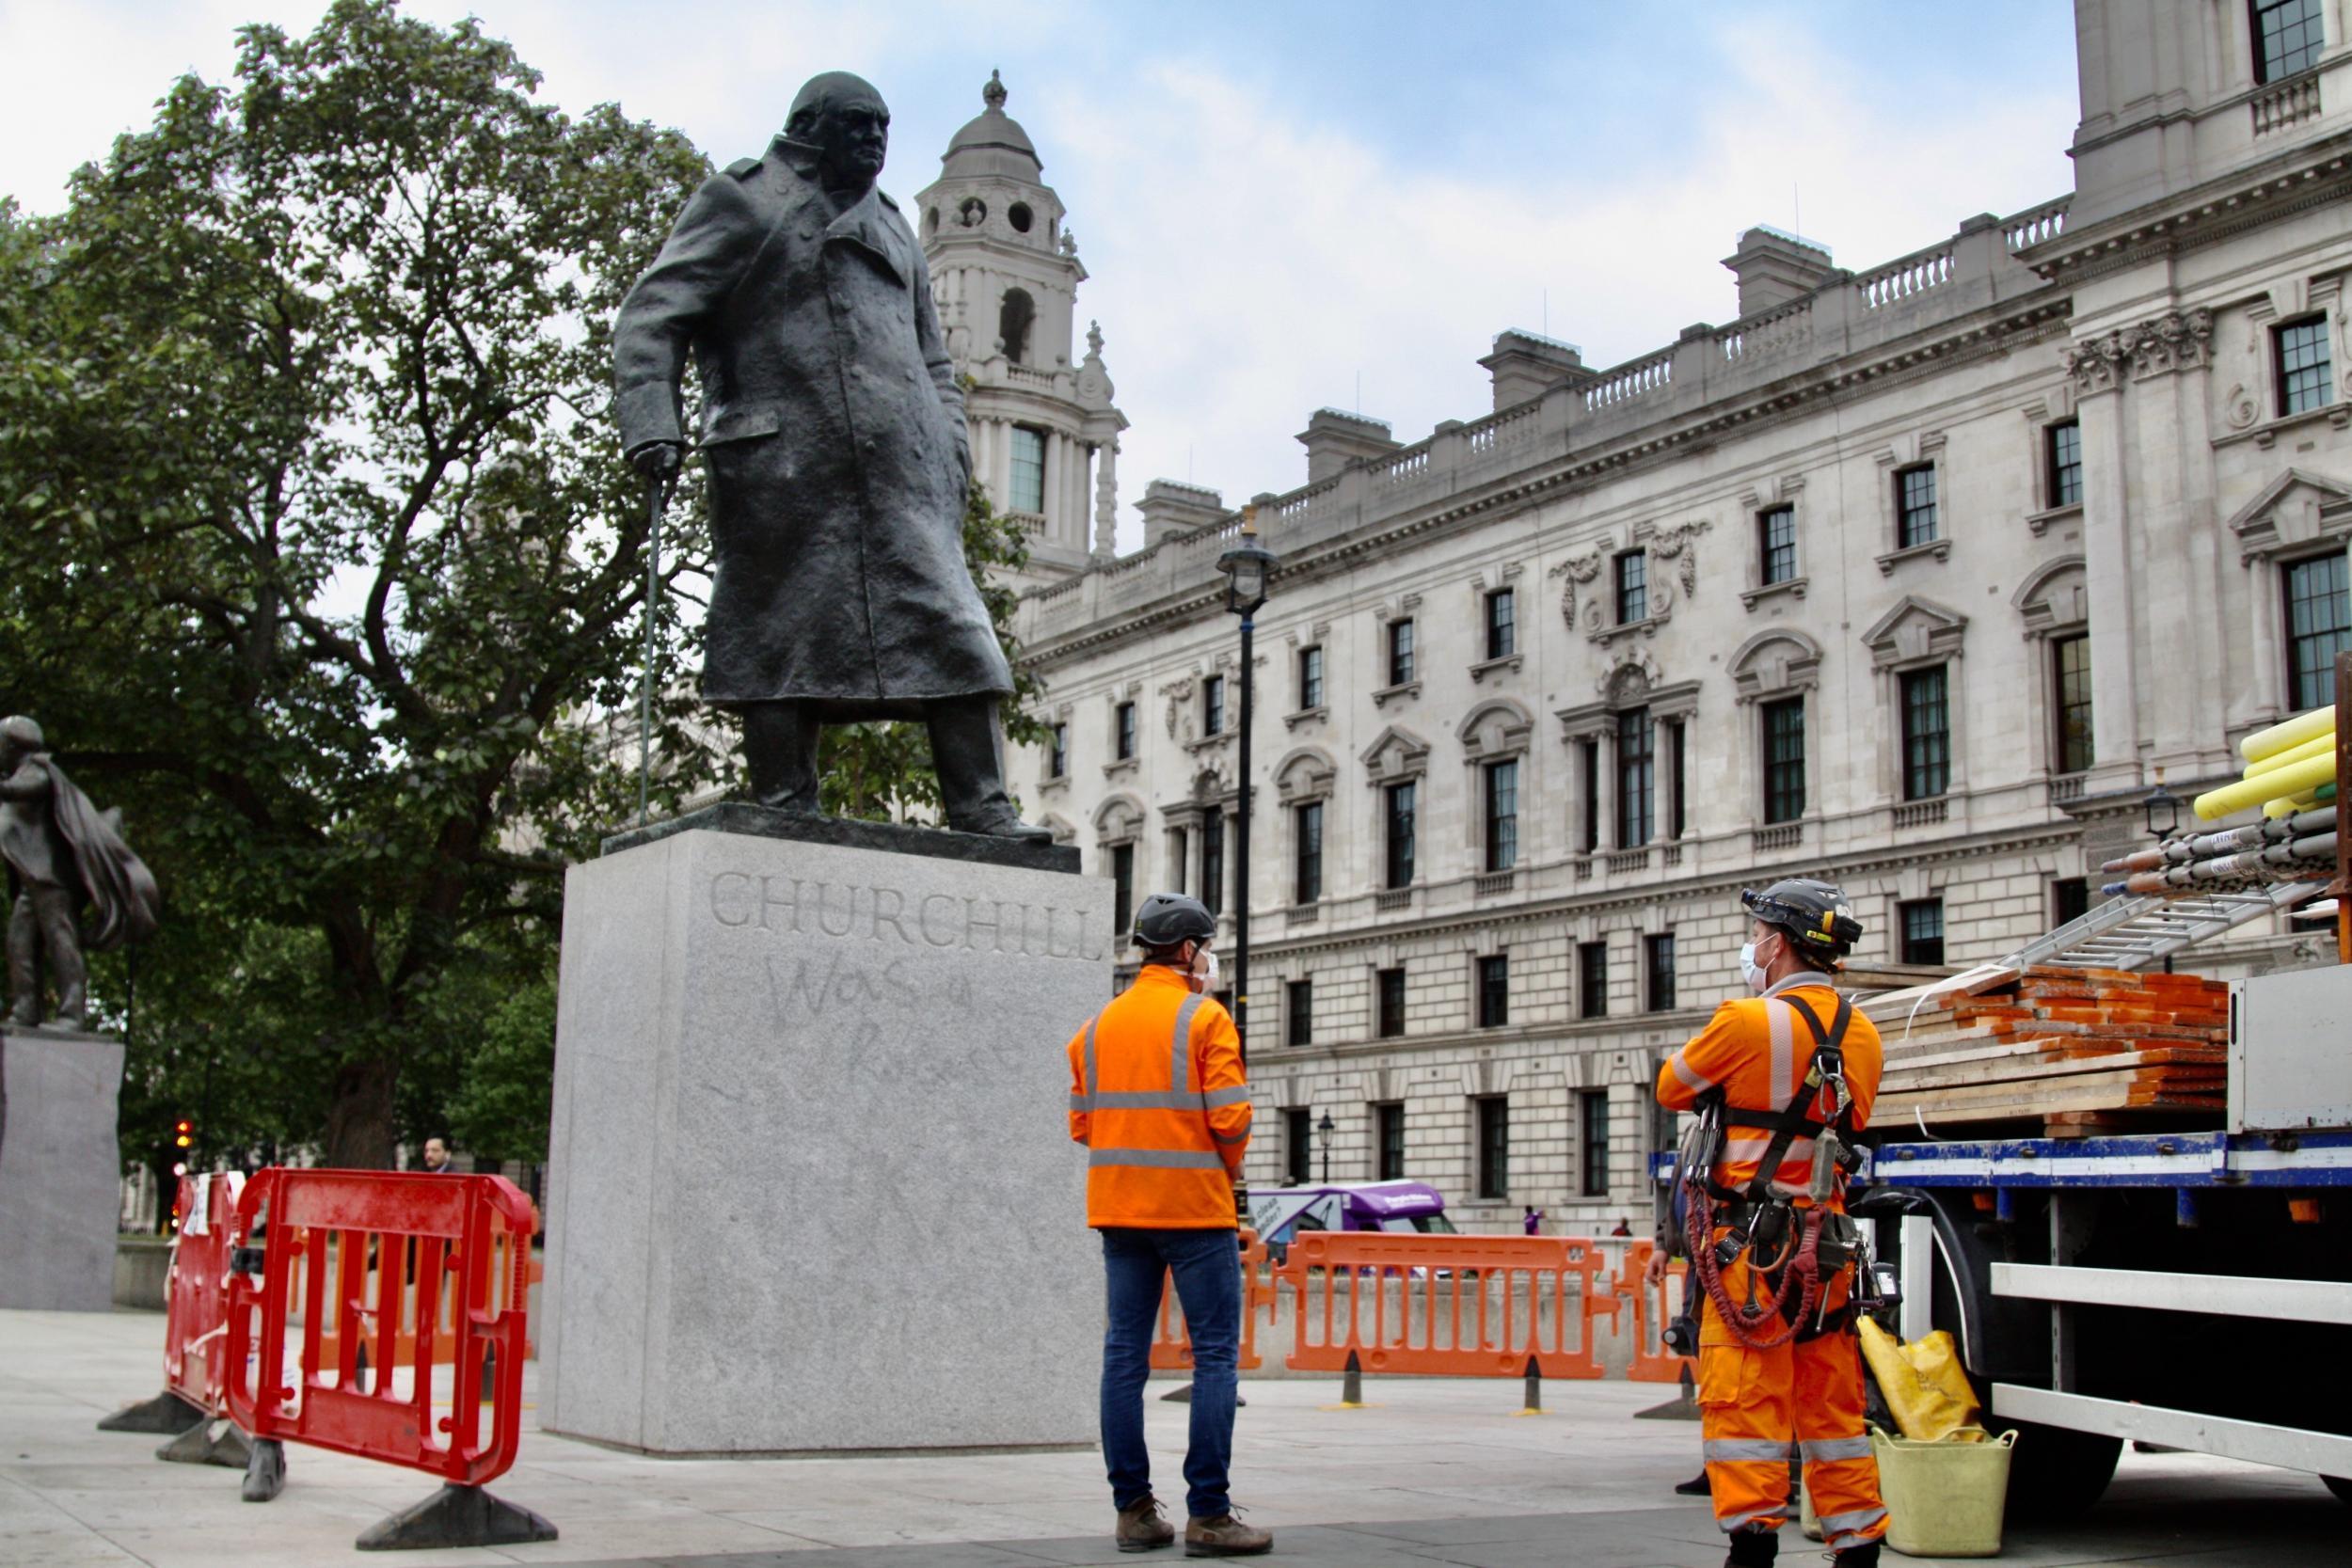 The Winston Churchill statue in Parliament Square was vandalised last weekend